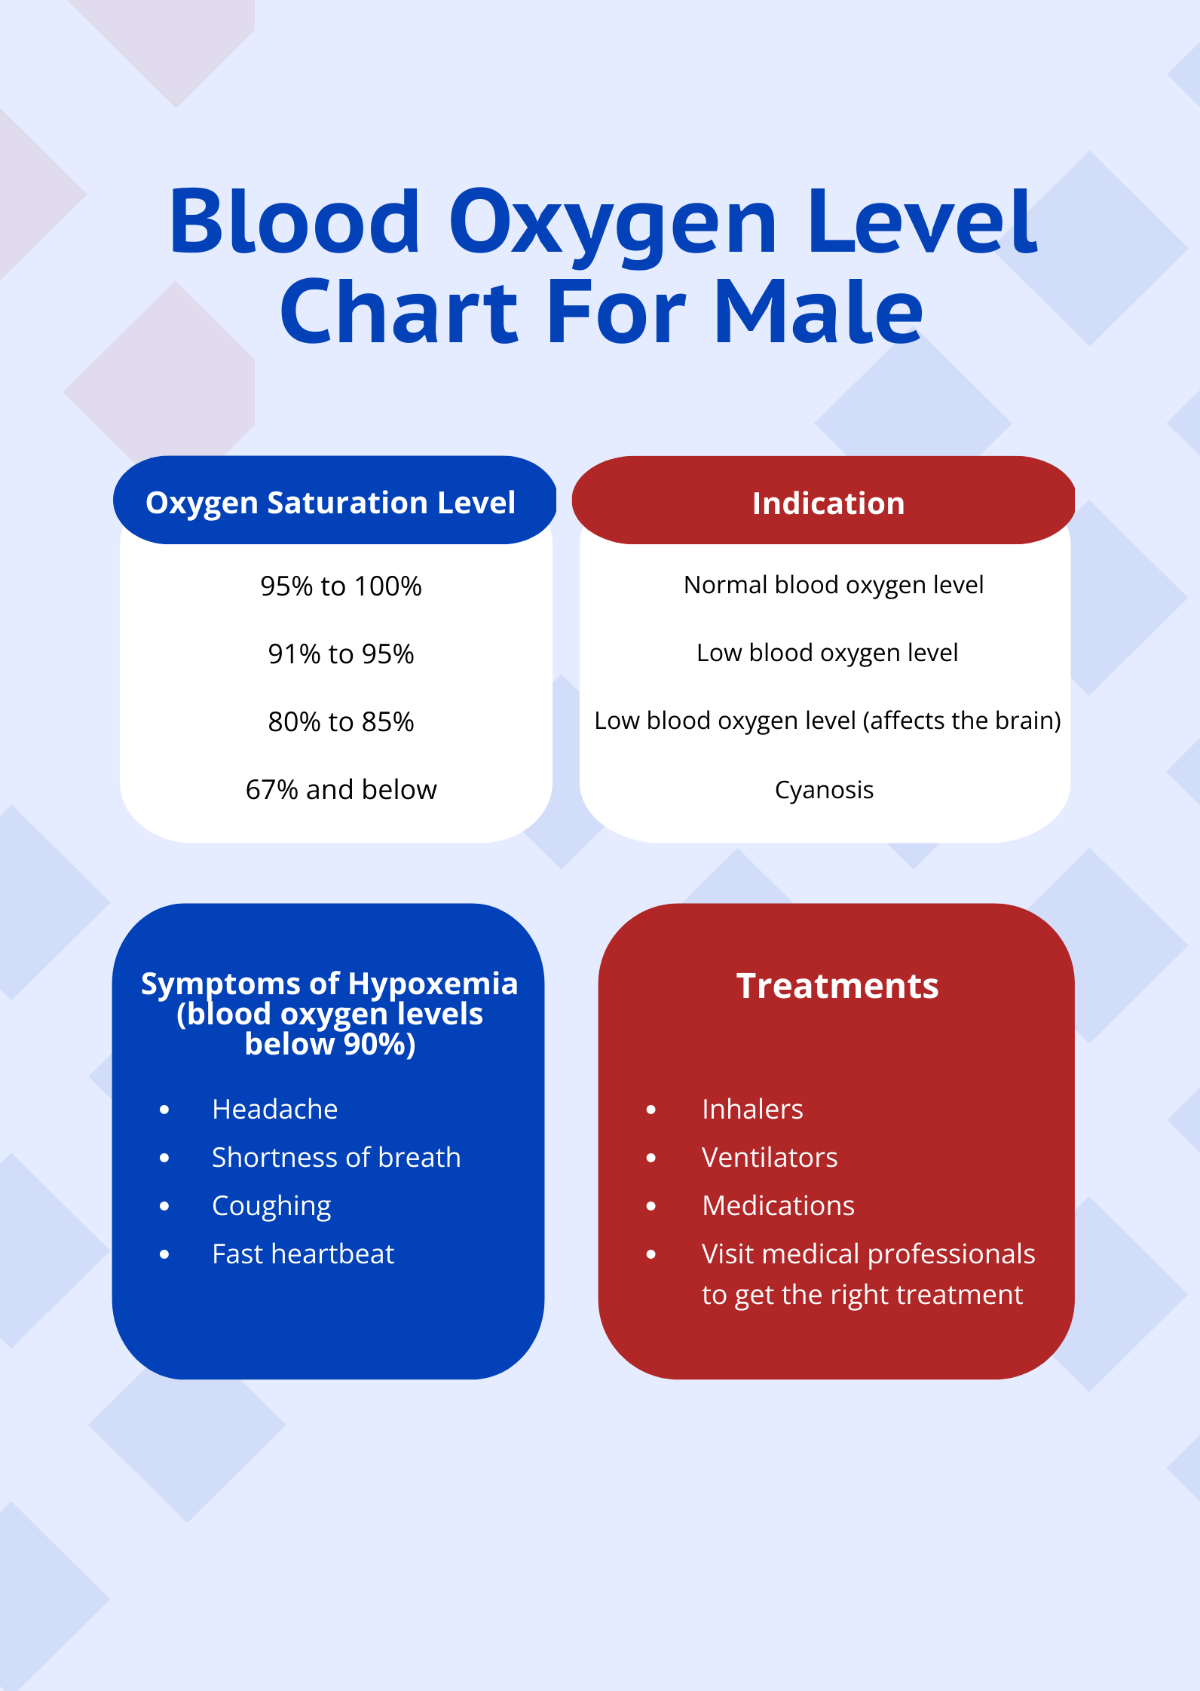 Blood Oxygen Level Chart For Male Template